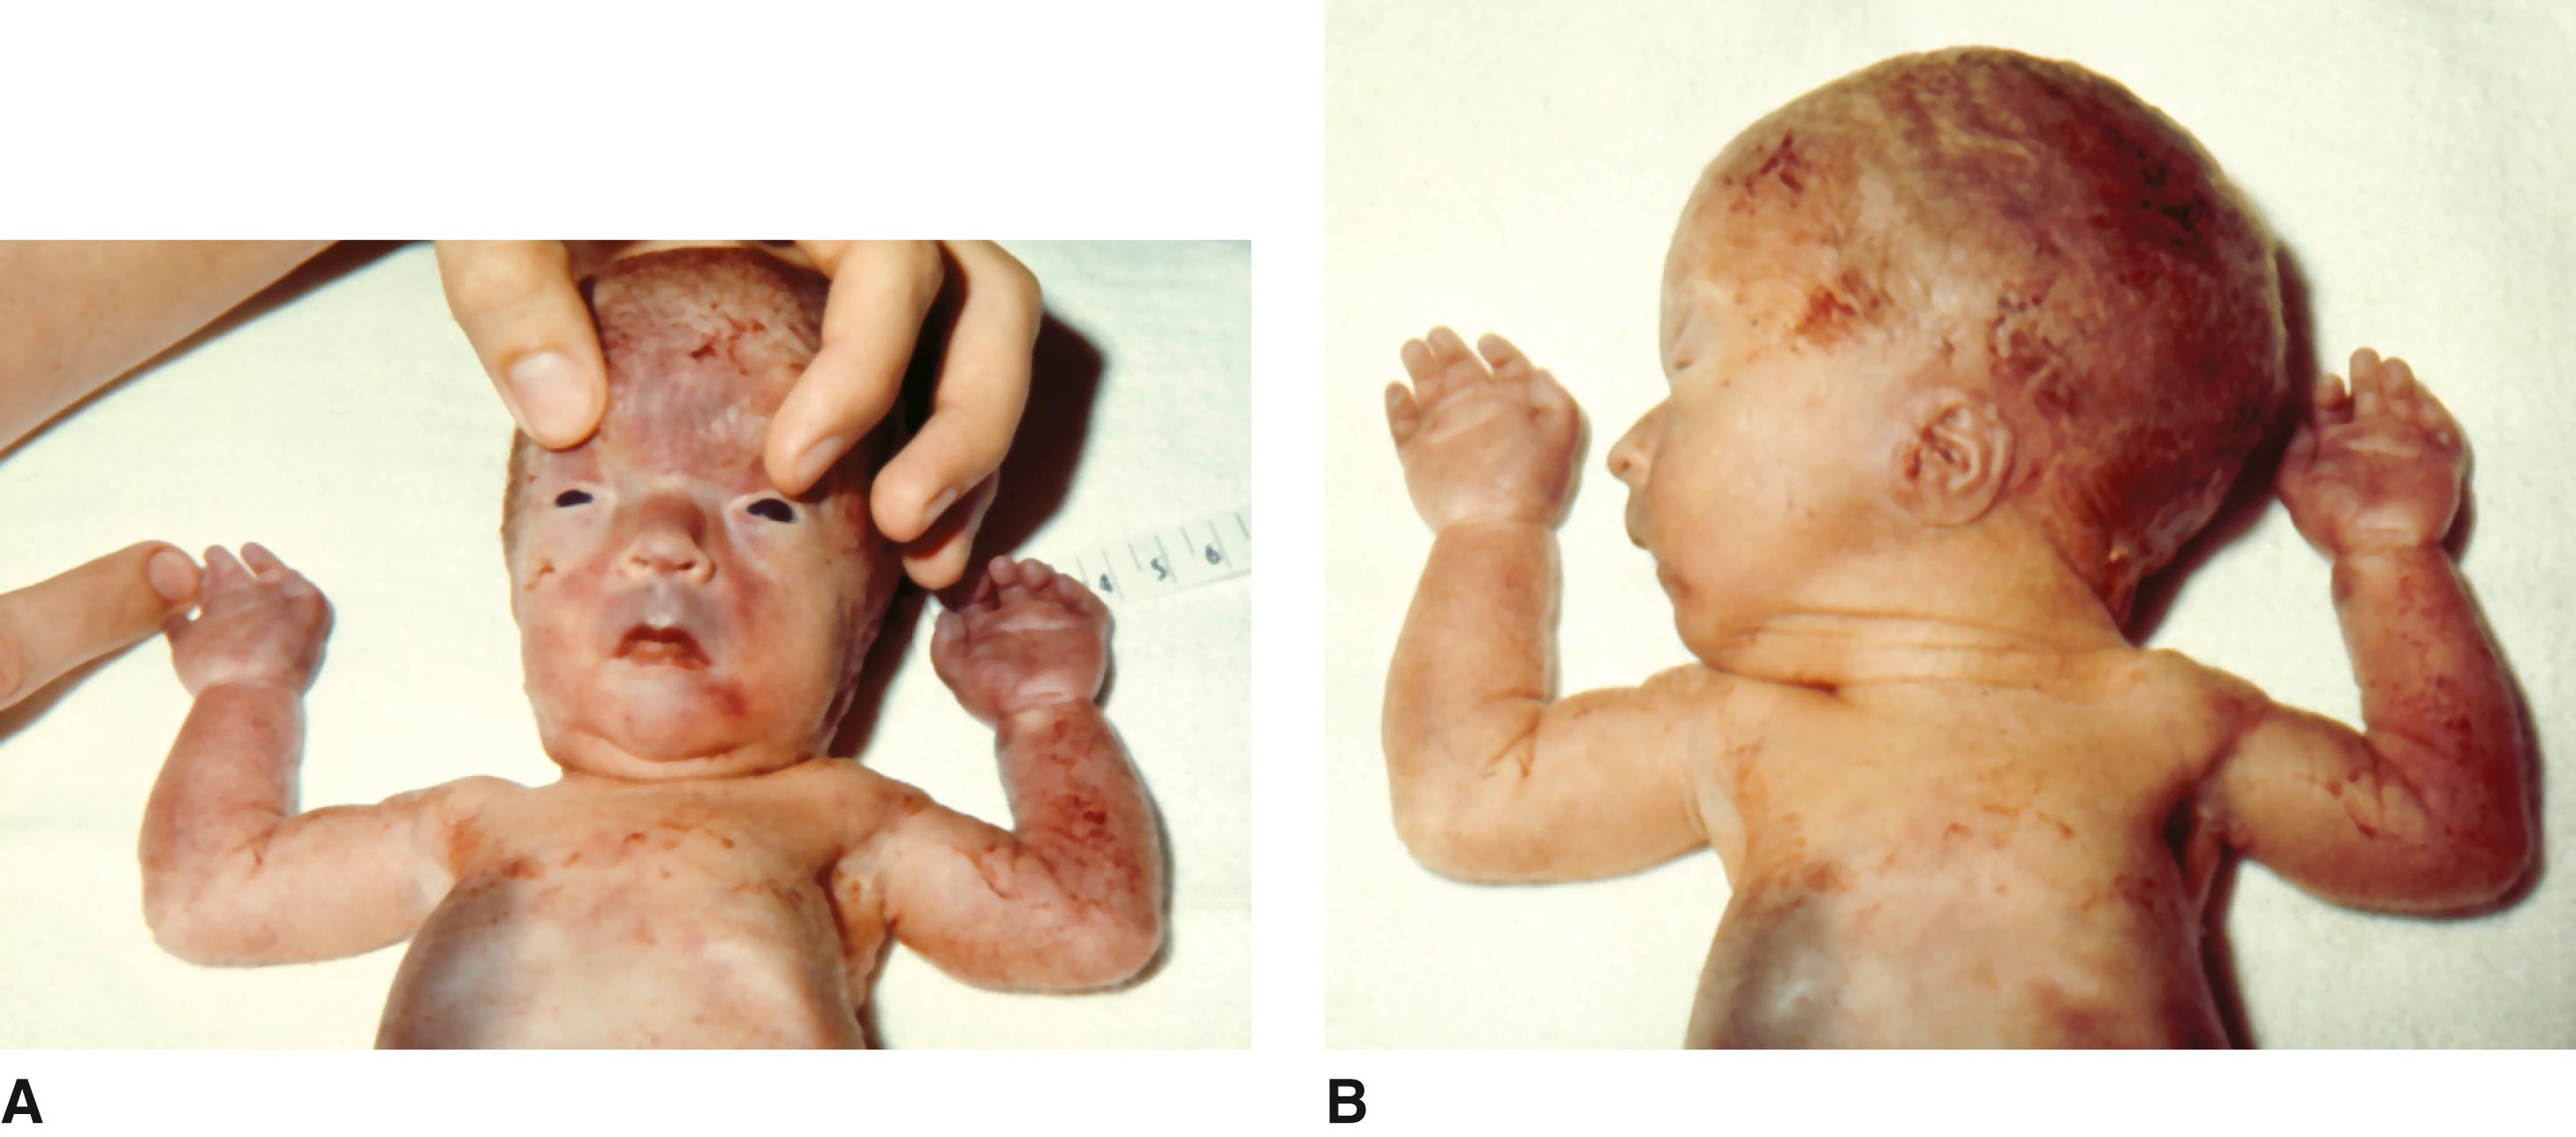 FIGURE 1, A and B, Stillborn infant with triploidy showing relatively large-appearing upper head in relation to very small face and 3-4 syndactyly of the fingers.